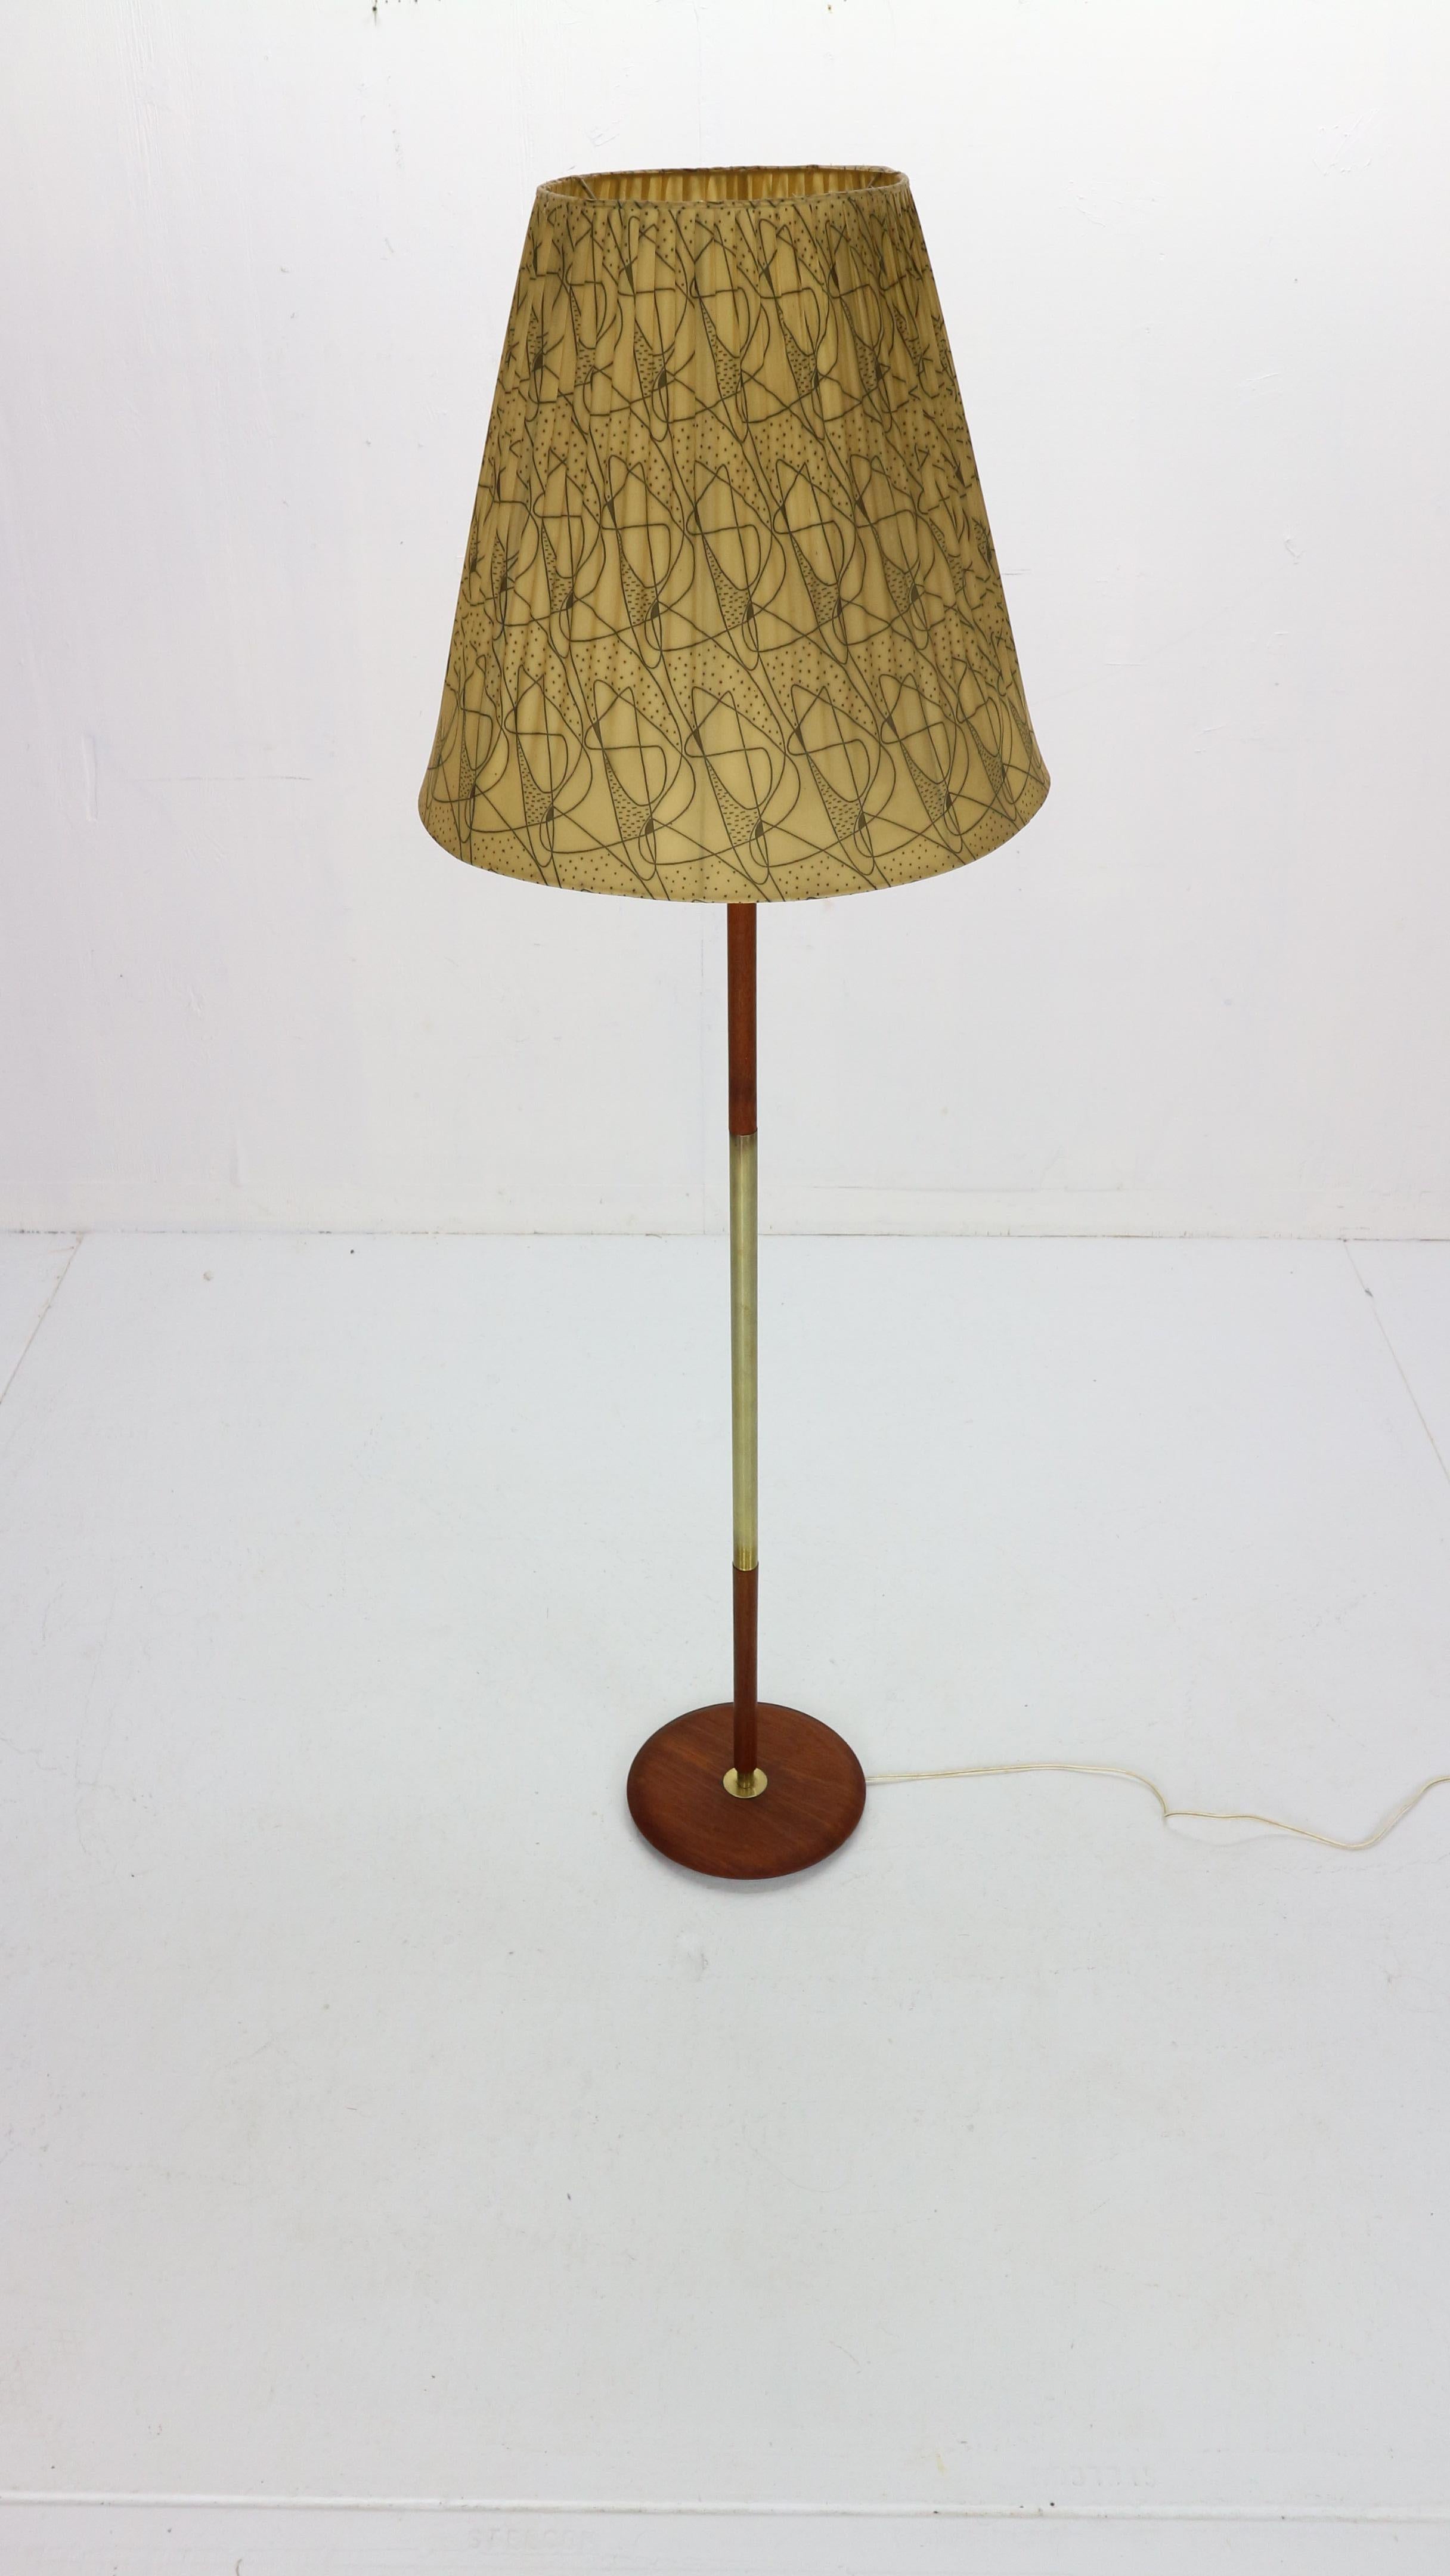 Mid-Century Modern period floor lamp is made in 1950s period, Denmark.
The lamp has a teak base combined with brass details. The switch is attached to the fitting and is typical Danish design.
The lamp shade is yellow color with ornaments.
The